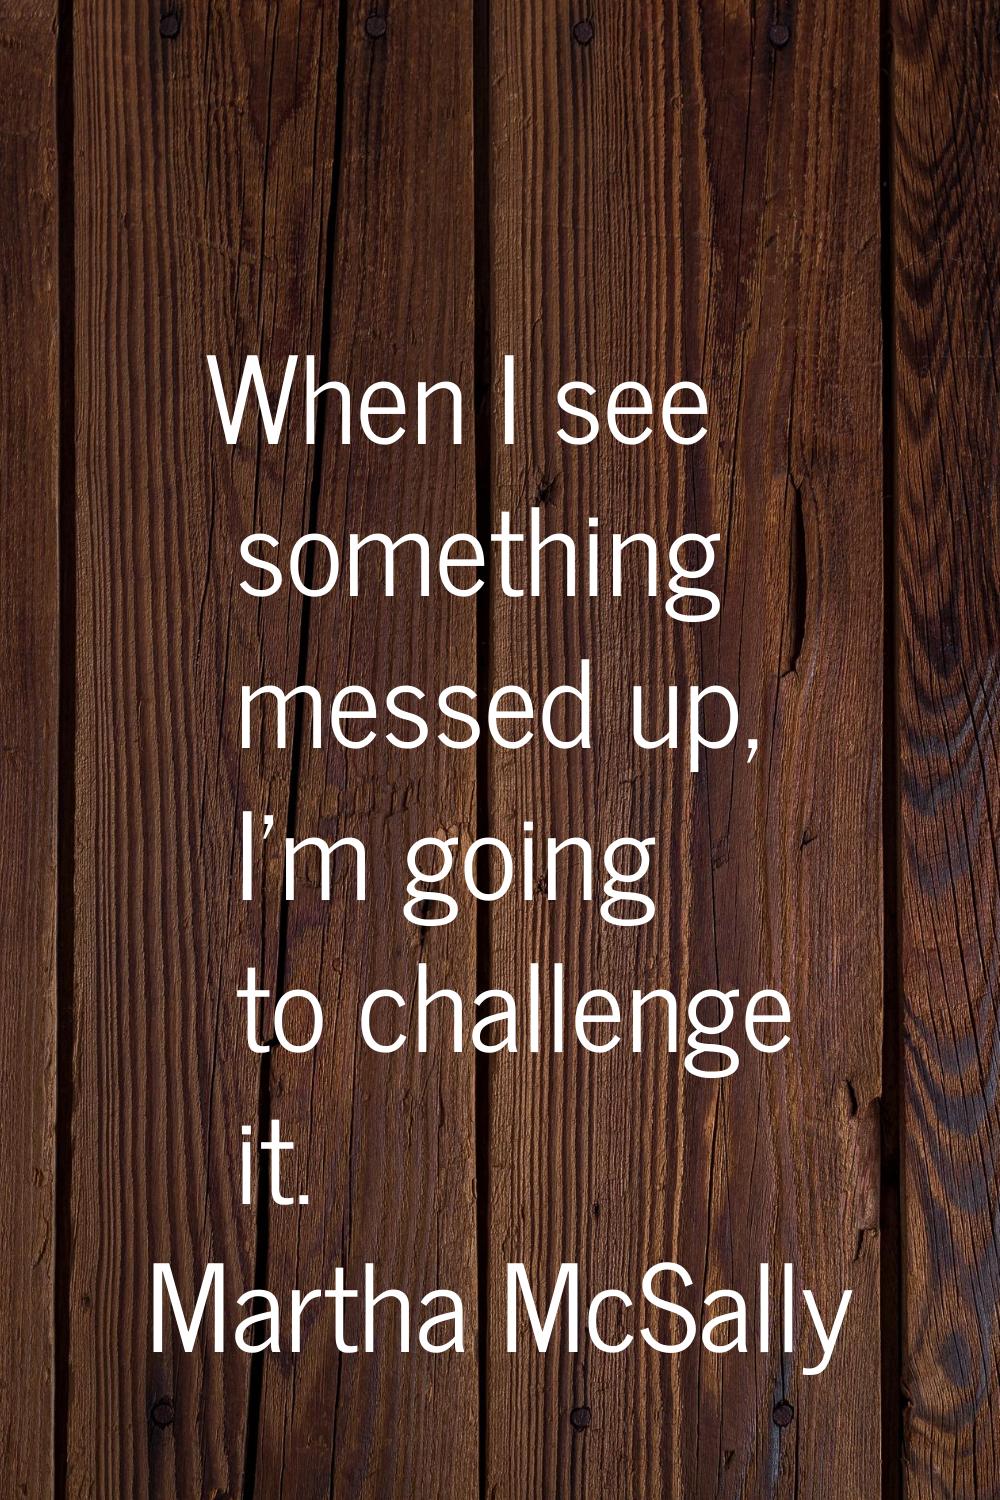 When I see something messed up, I'm going to challenge it.